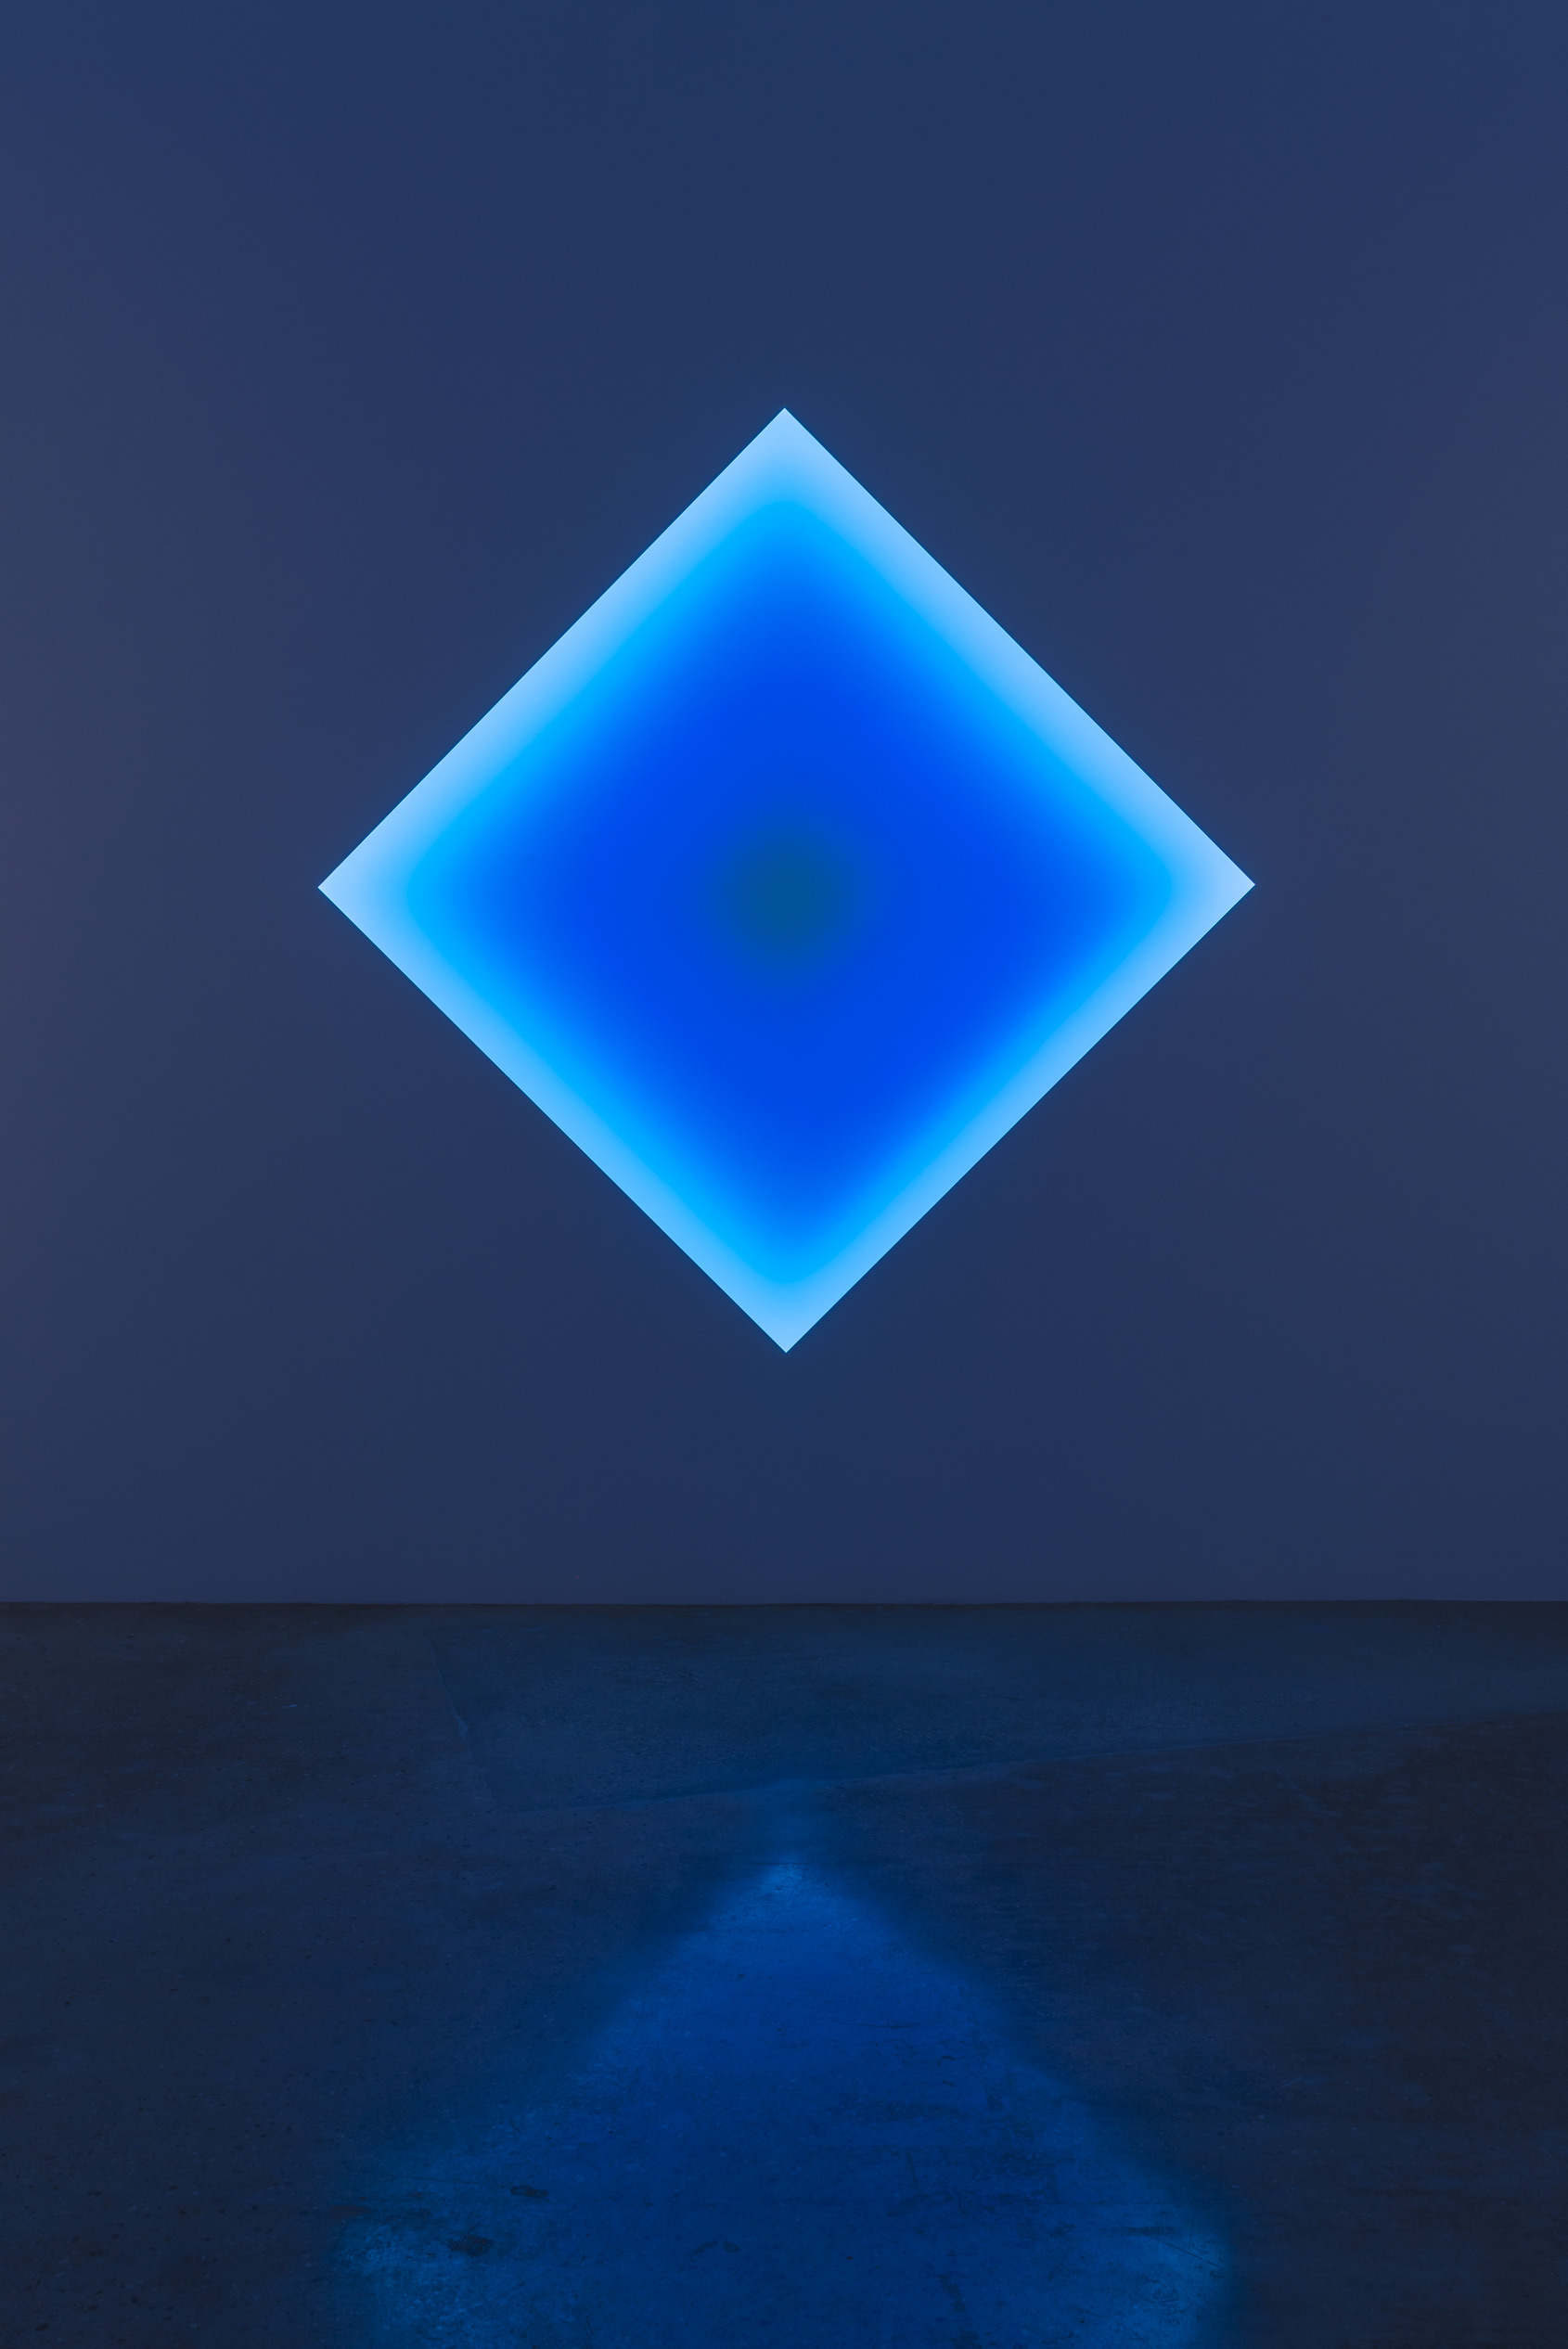 James Turrell, Corinth Canal, 2016, L.E.D. light, etched glass and shallow space, 2 hours 30 minutes, 89 x 89 inches © Courtesy of the artist and ALIEN Art Centre 